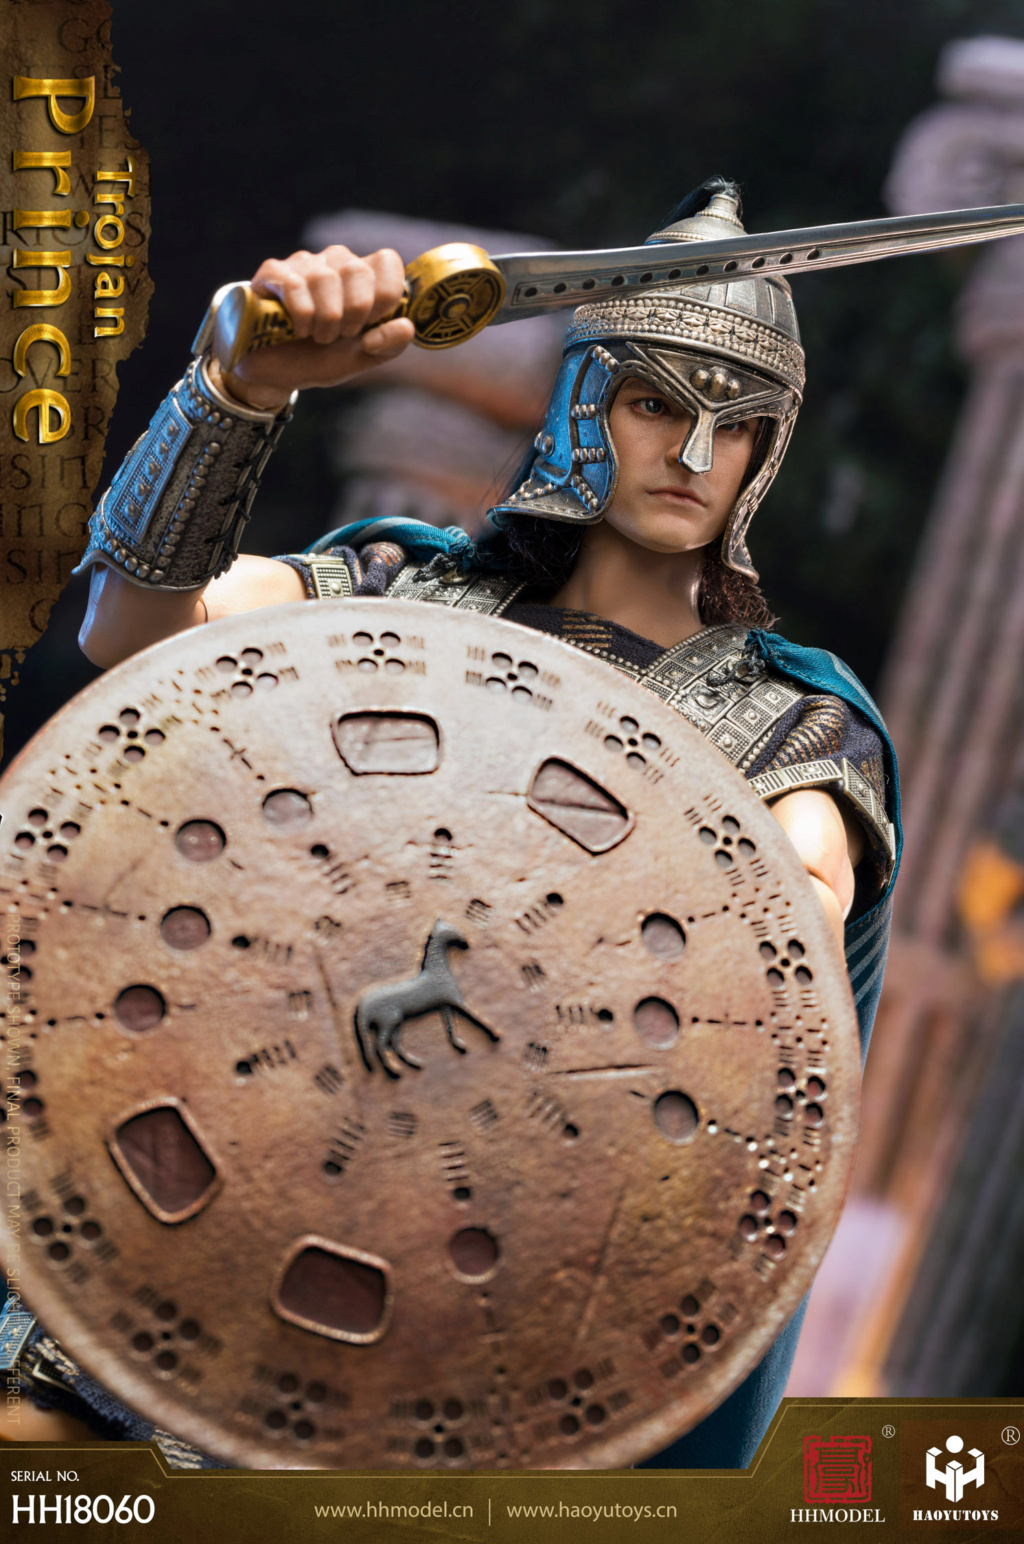 movie-based - NEW PRODUCT: HHMODEL & HAOYUTOYS: 1/6 Empire Legion - Troy Prince Action Figure #HH18060 16281212